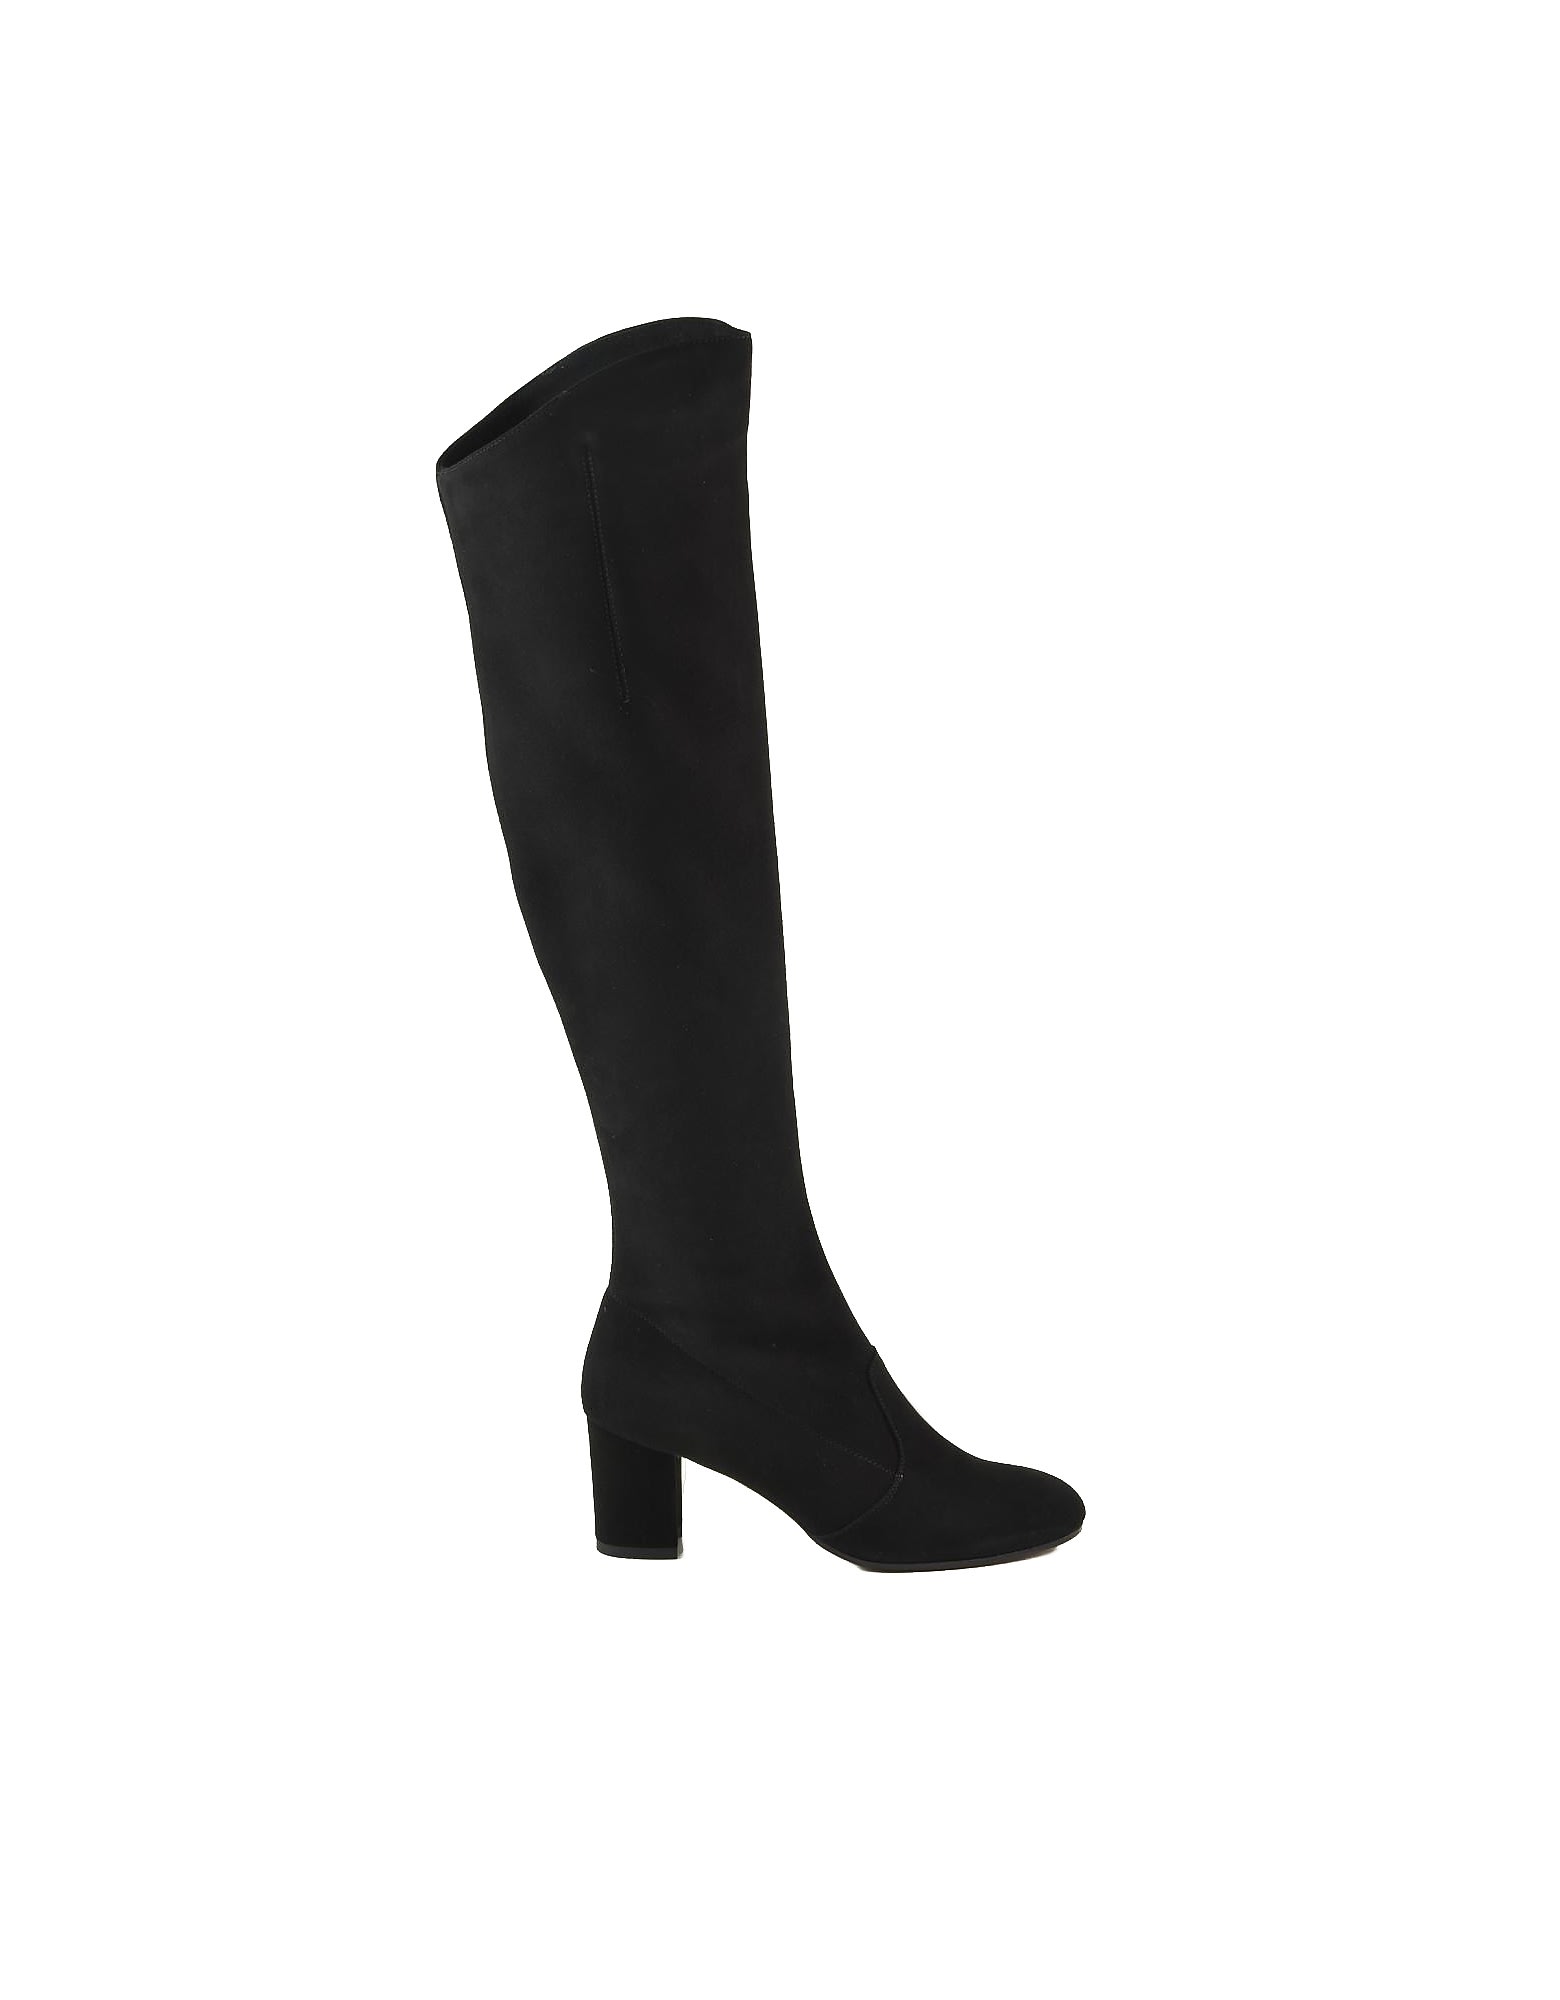 Lautre Chose Black Suede To-the-knee Boots